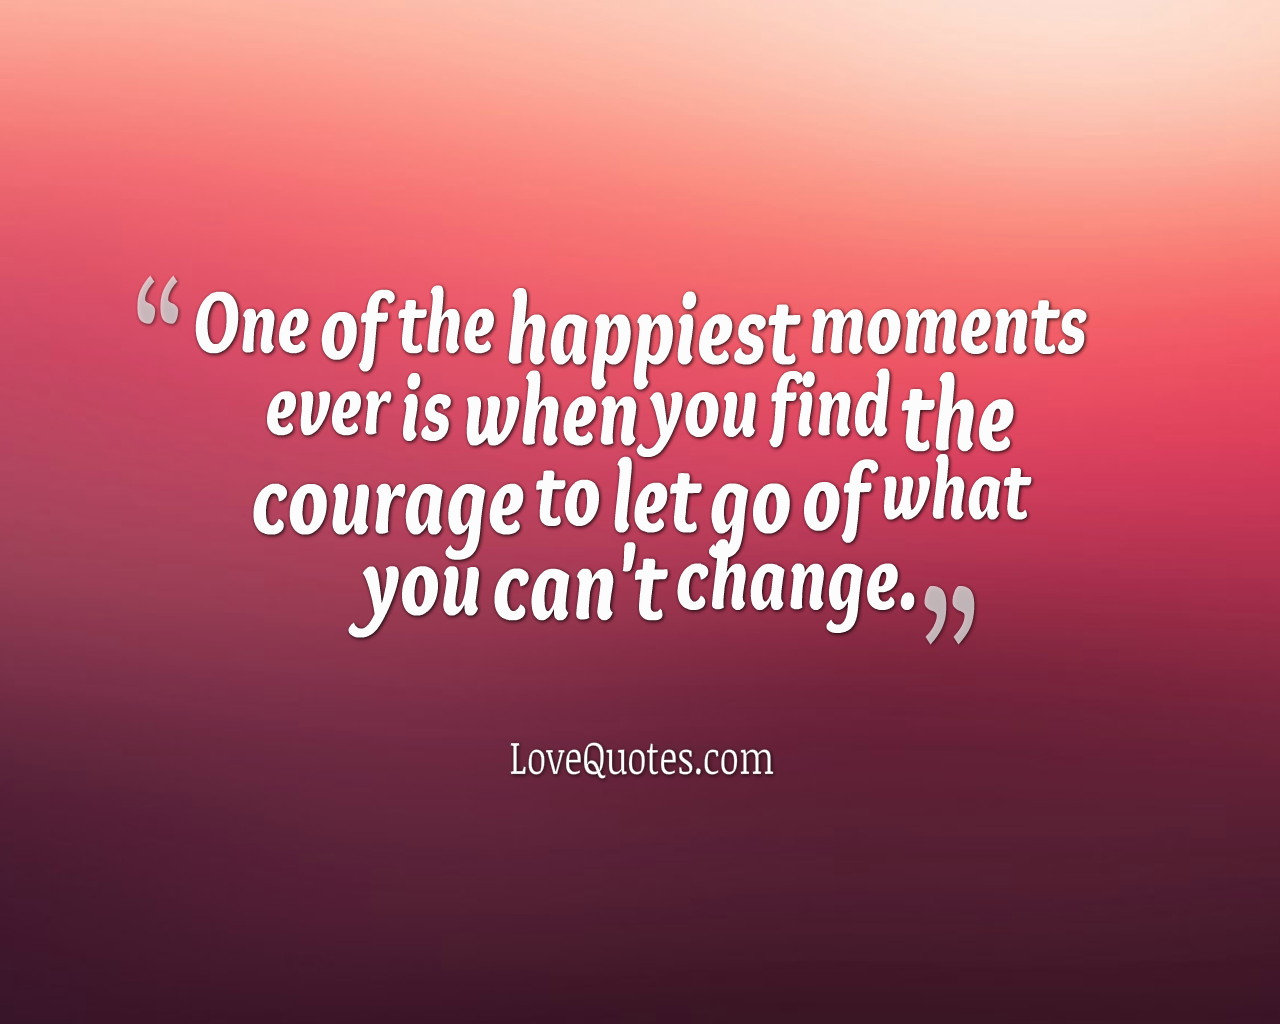 The Courage To Let Go